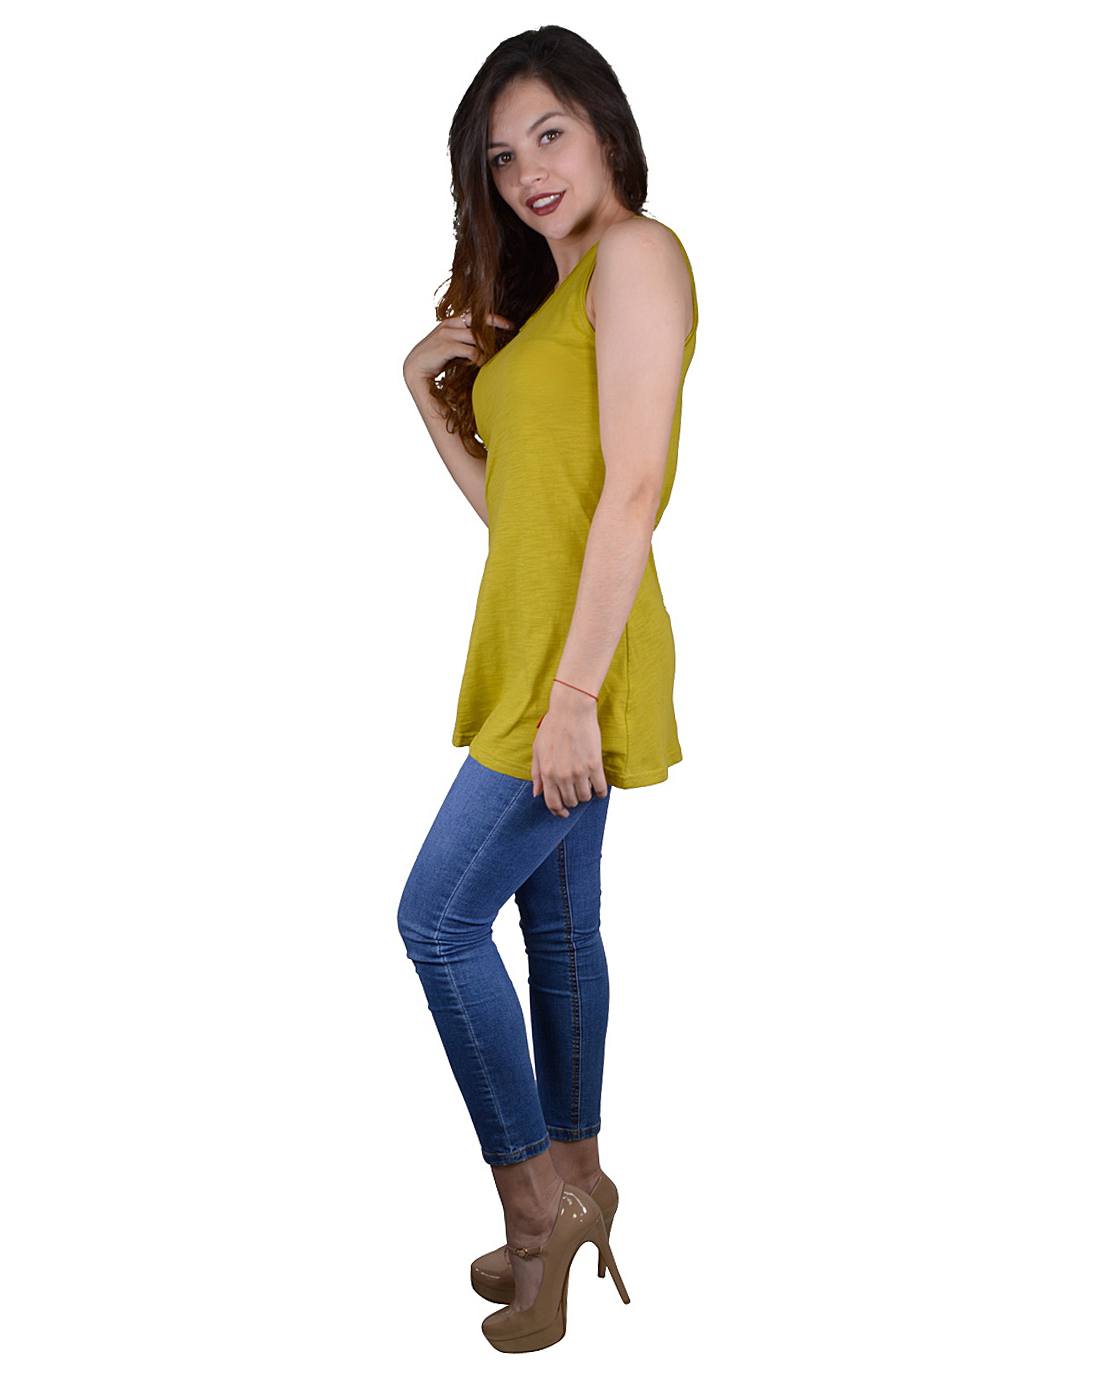 Solid Sleeveless Tunic Top with Stylish Back Design